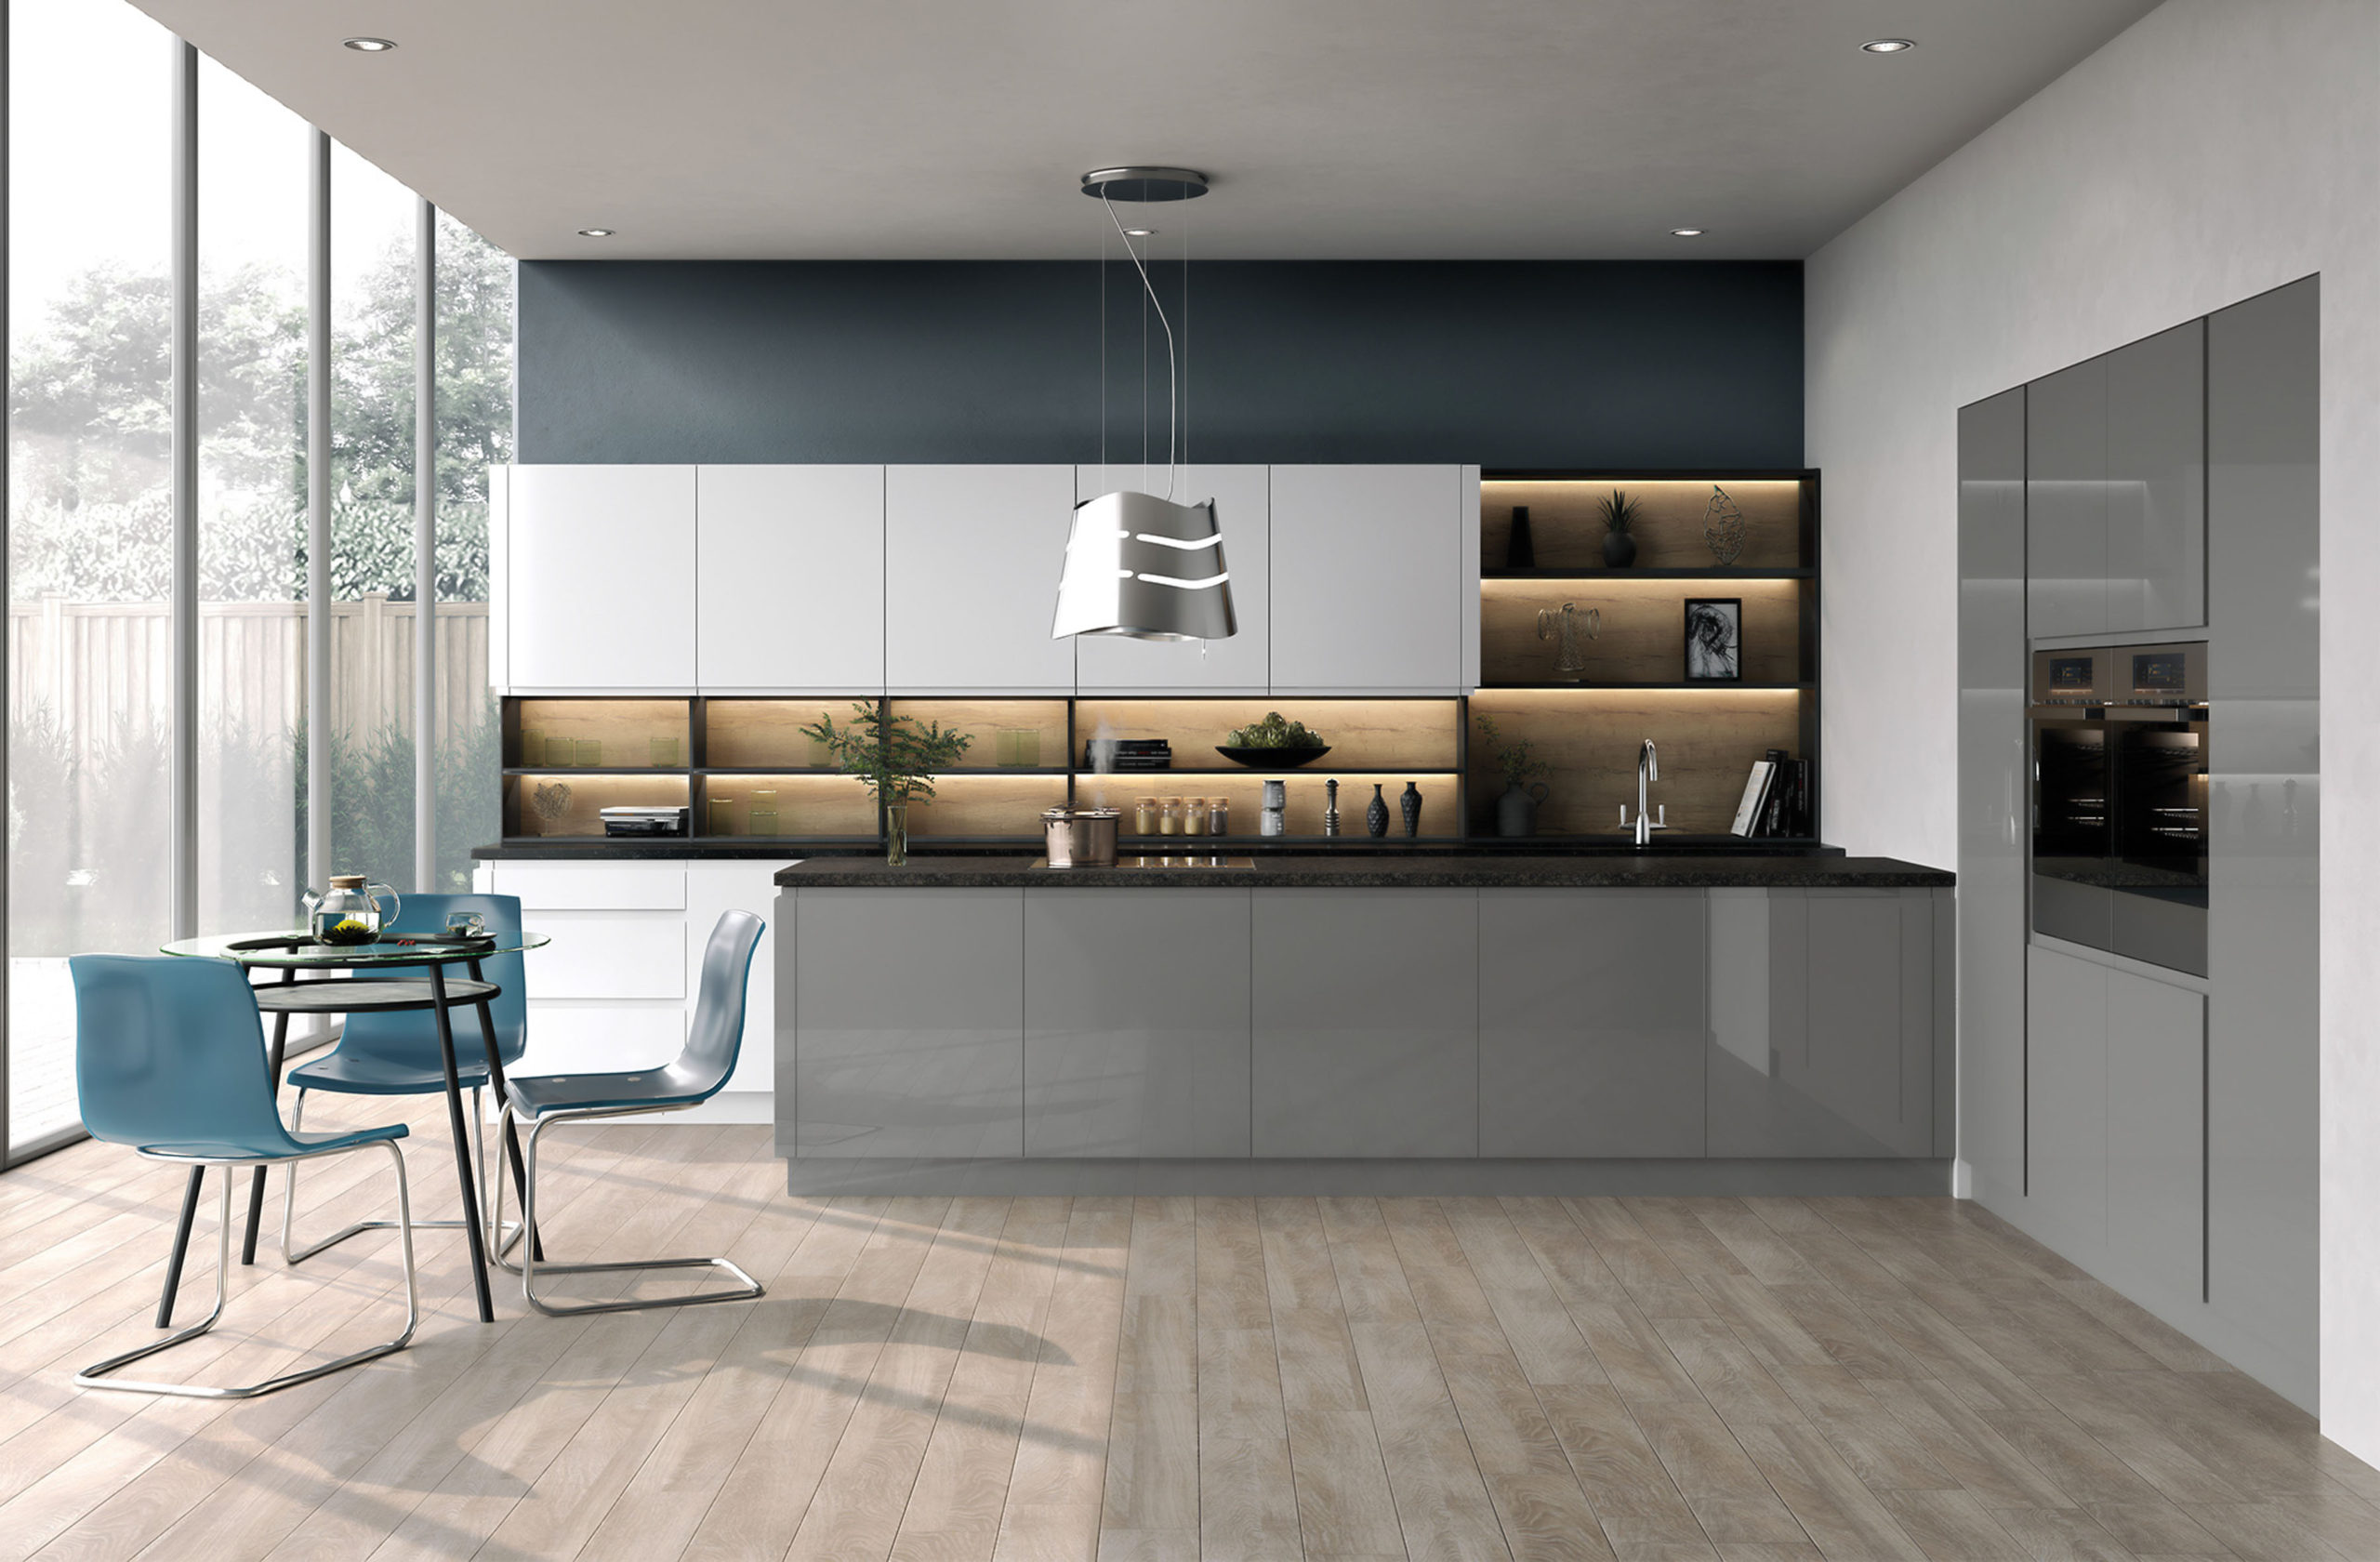 Kitchen Trends 2020: Cook Up A Fresh Look